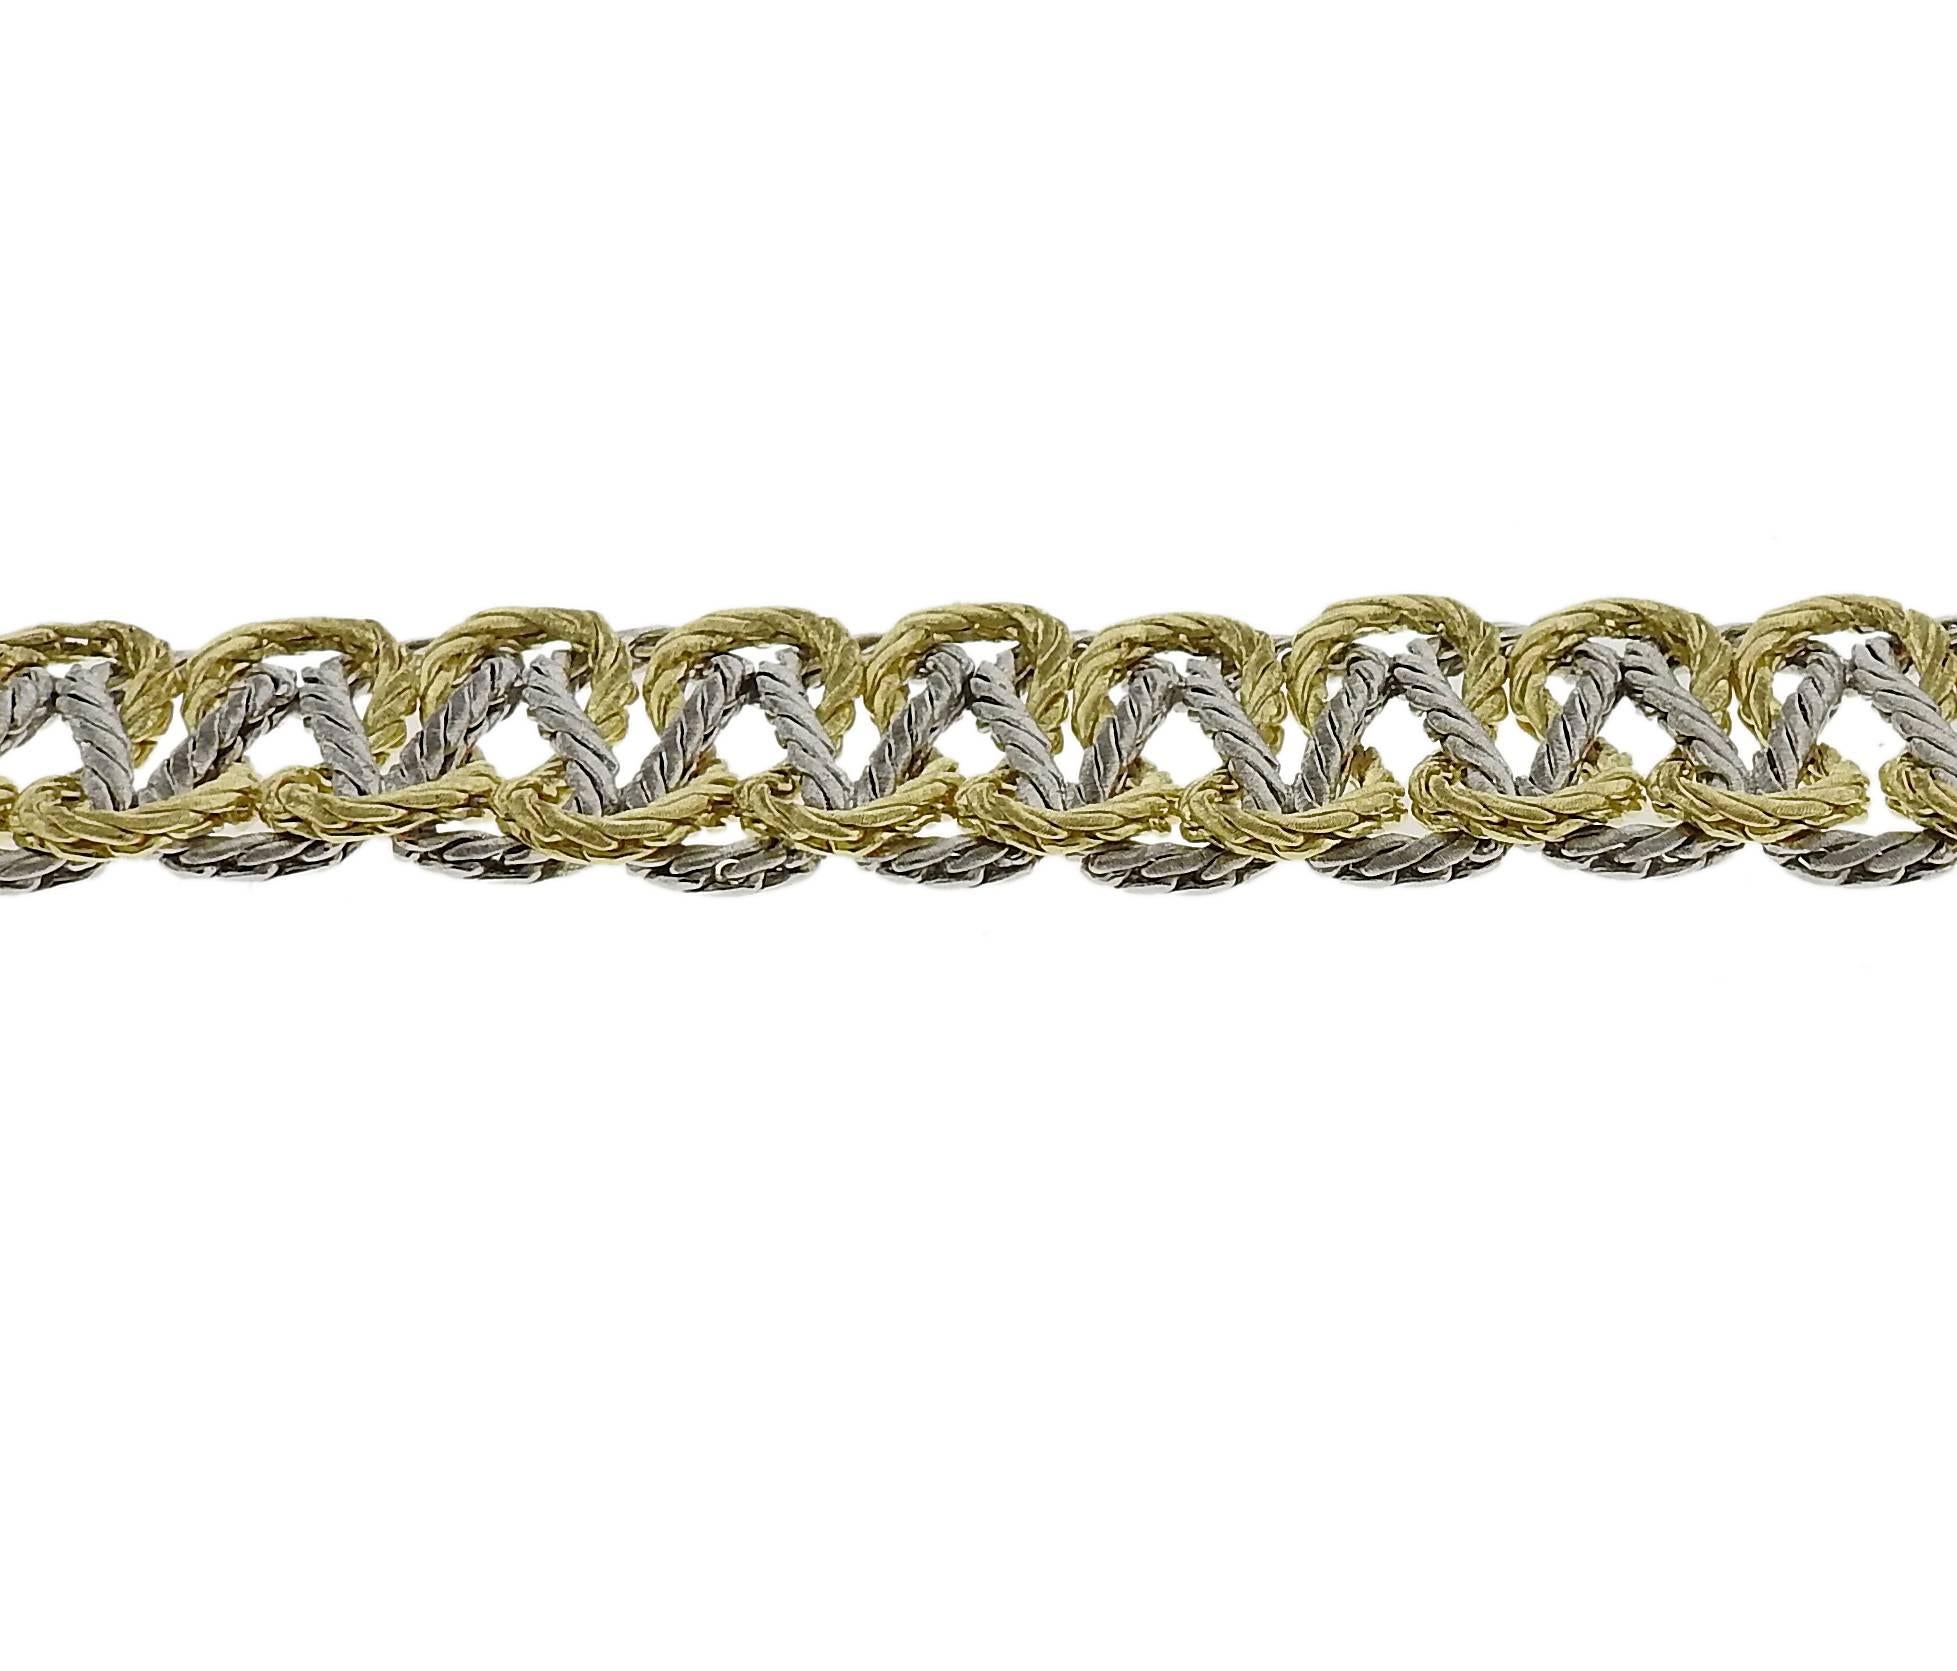 18k white and yellow gold woven bracelet, crafted by Buccellati. Bracelet is 7 1/2